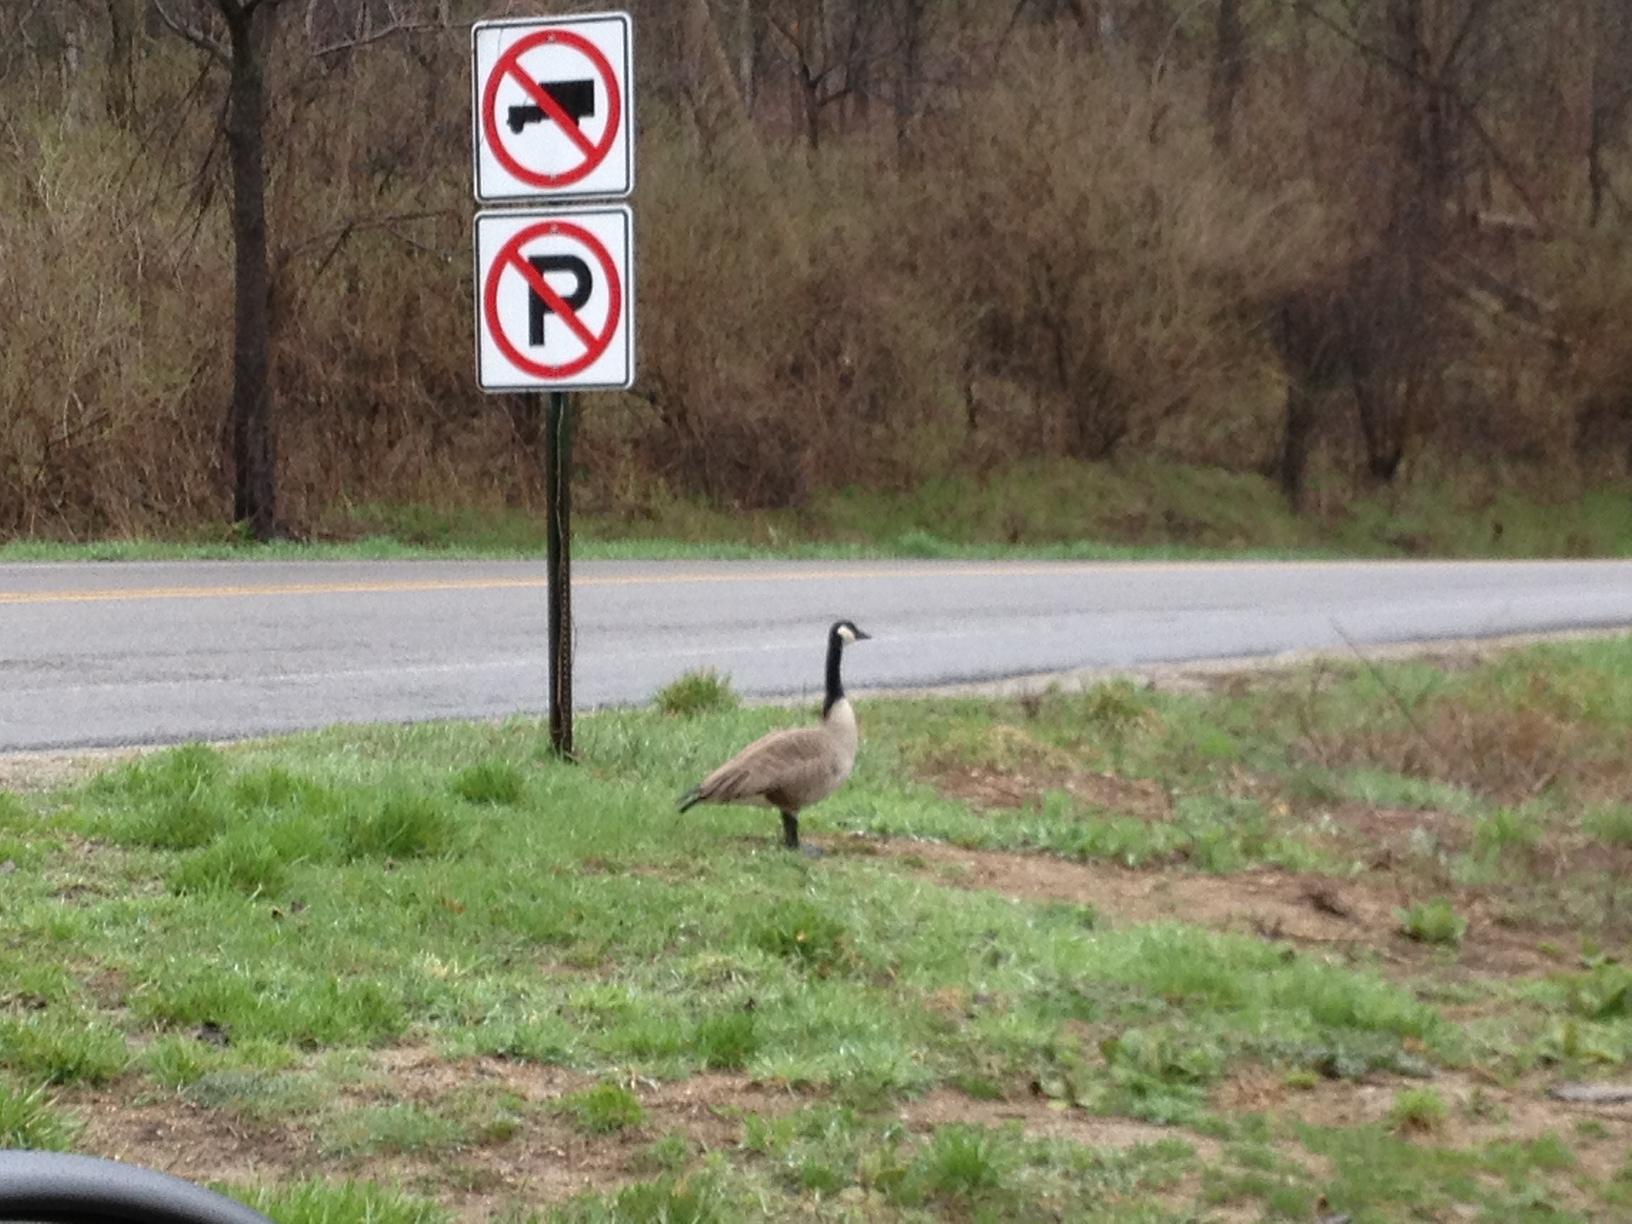 No parking at Delhi. Unless you are a goose.